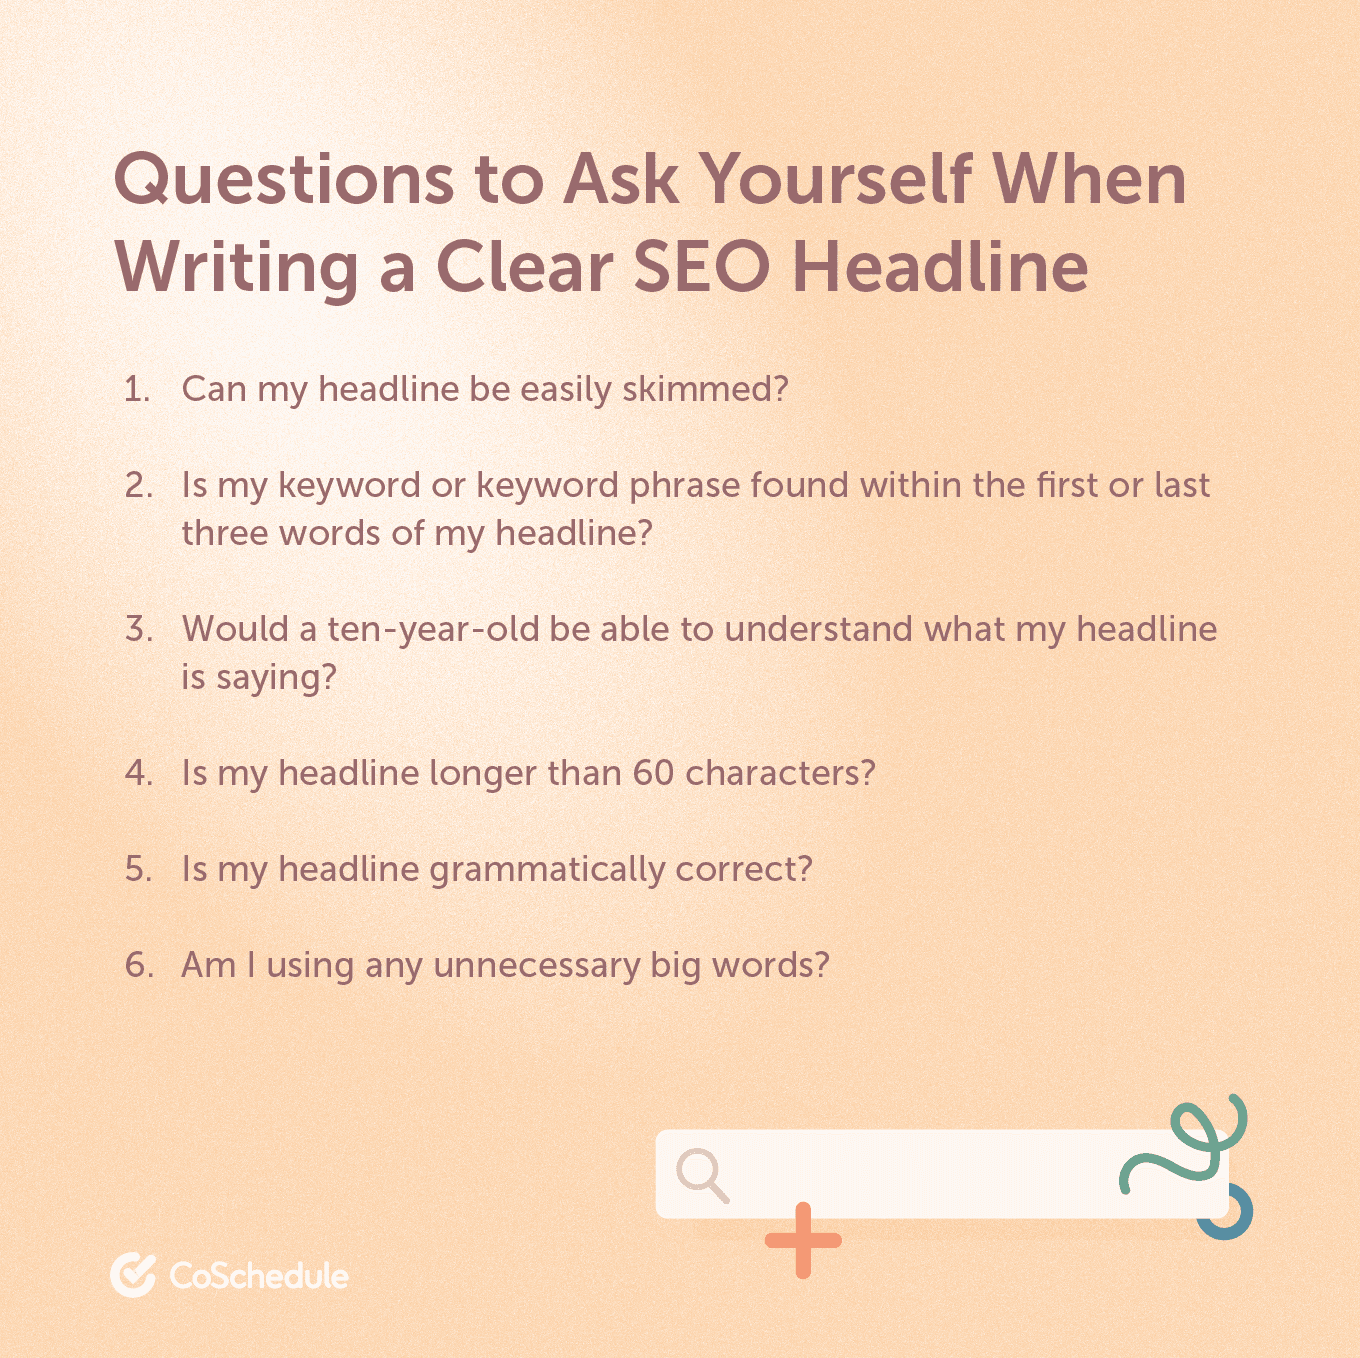 SEO headline questions to ask